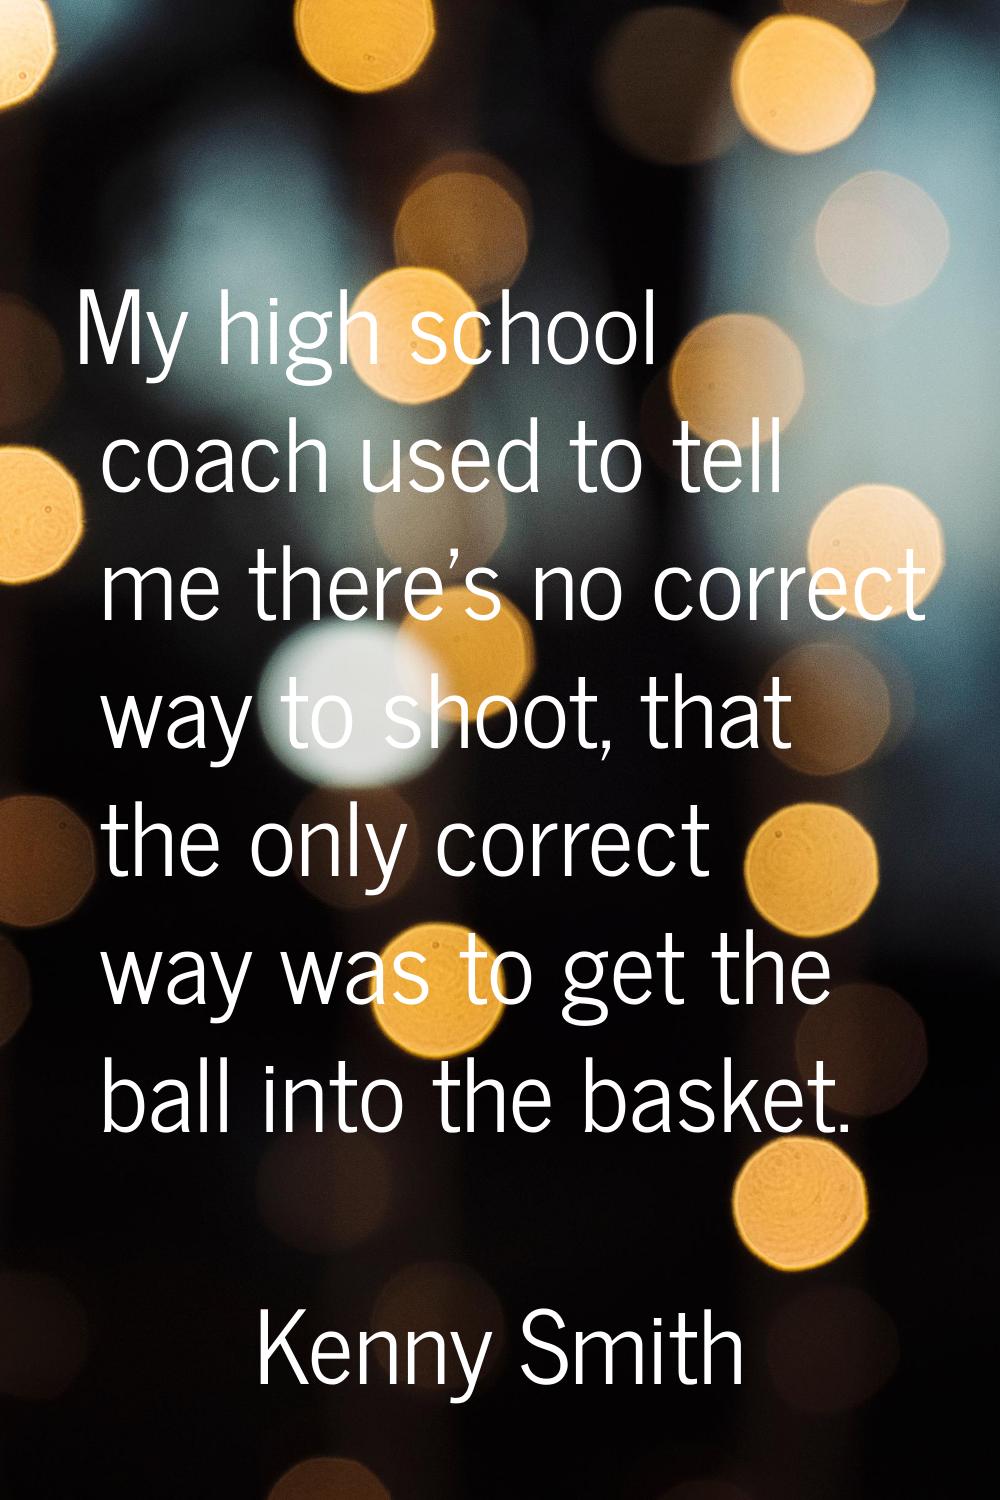 My high school coach used to tell me there's no correct way to shoot, that the only correct way was